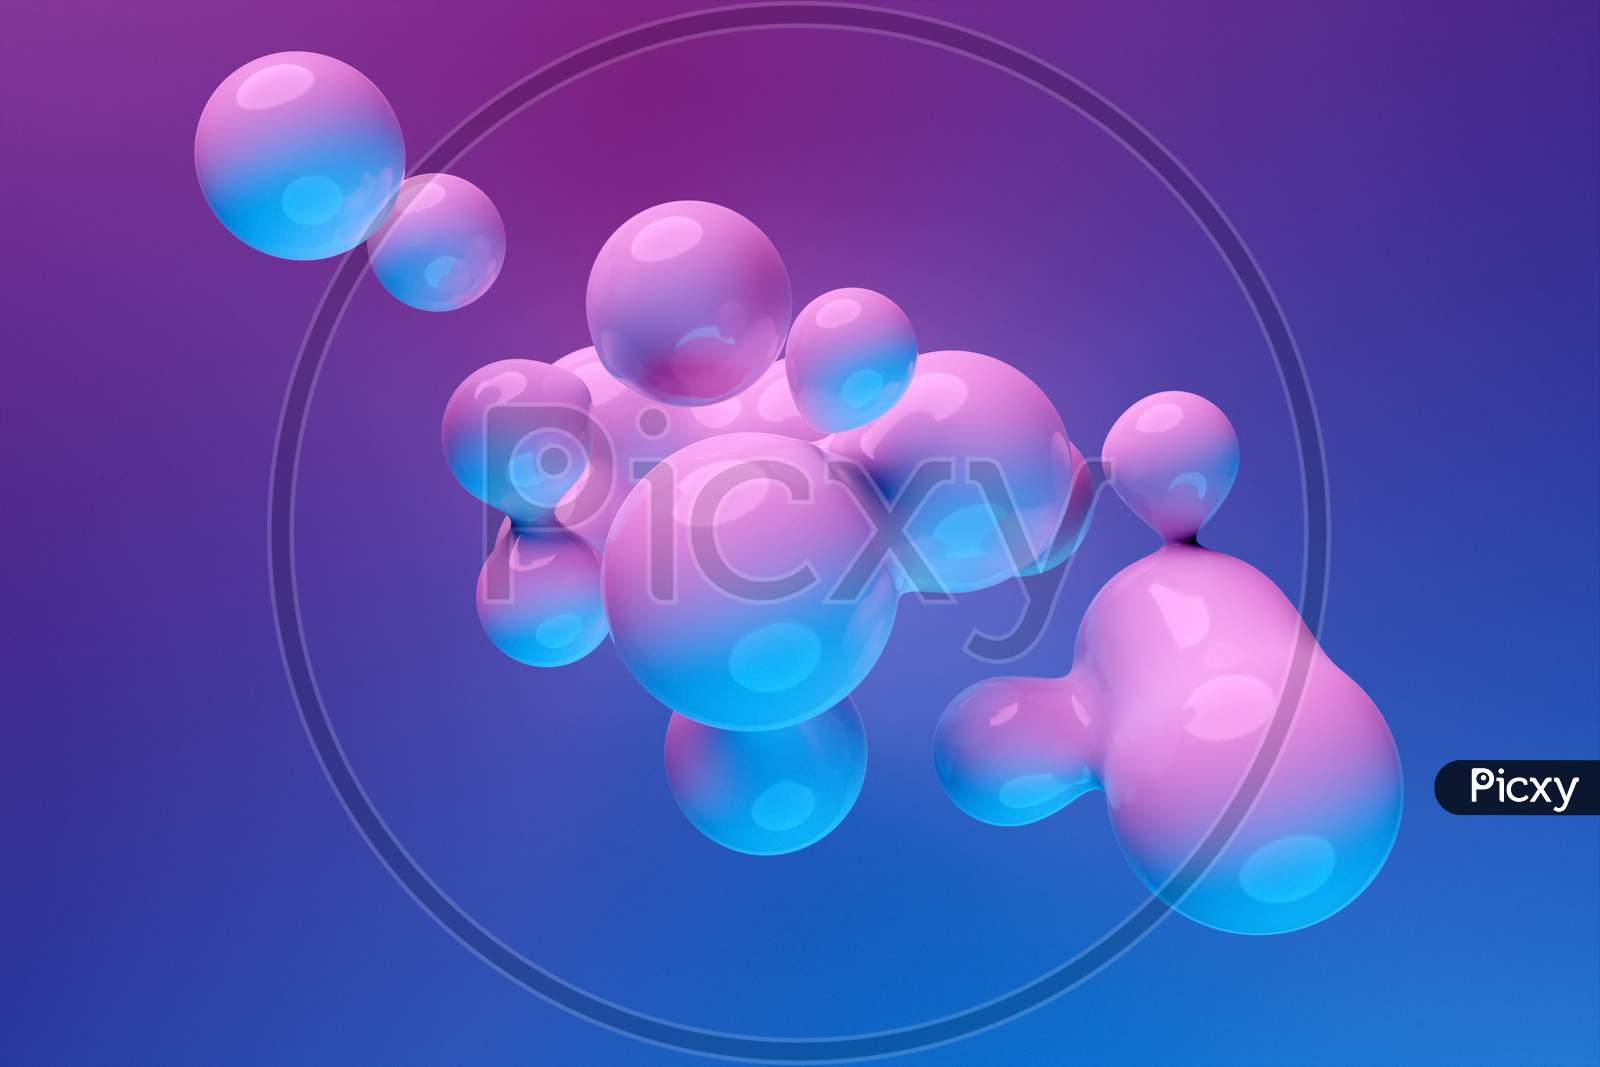 3D Illustration Of A Neon Metaball With A Huge Number Of Parts On A Blue Background. Digital Metaball Background Of Flying Overflowing Into Each Other Shiny Spheres.